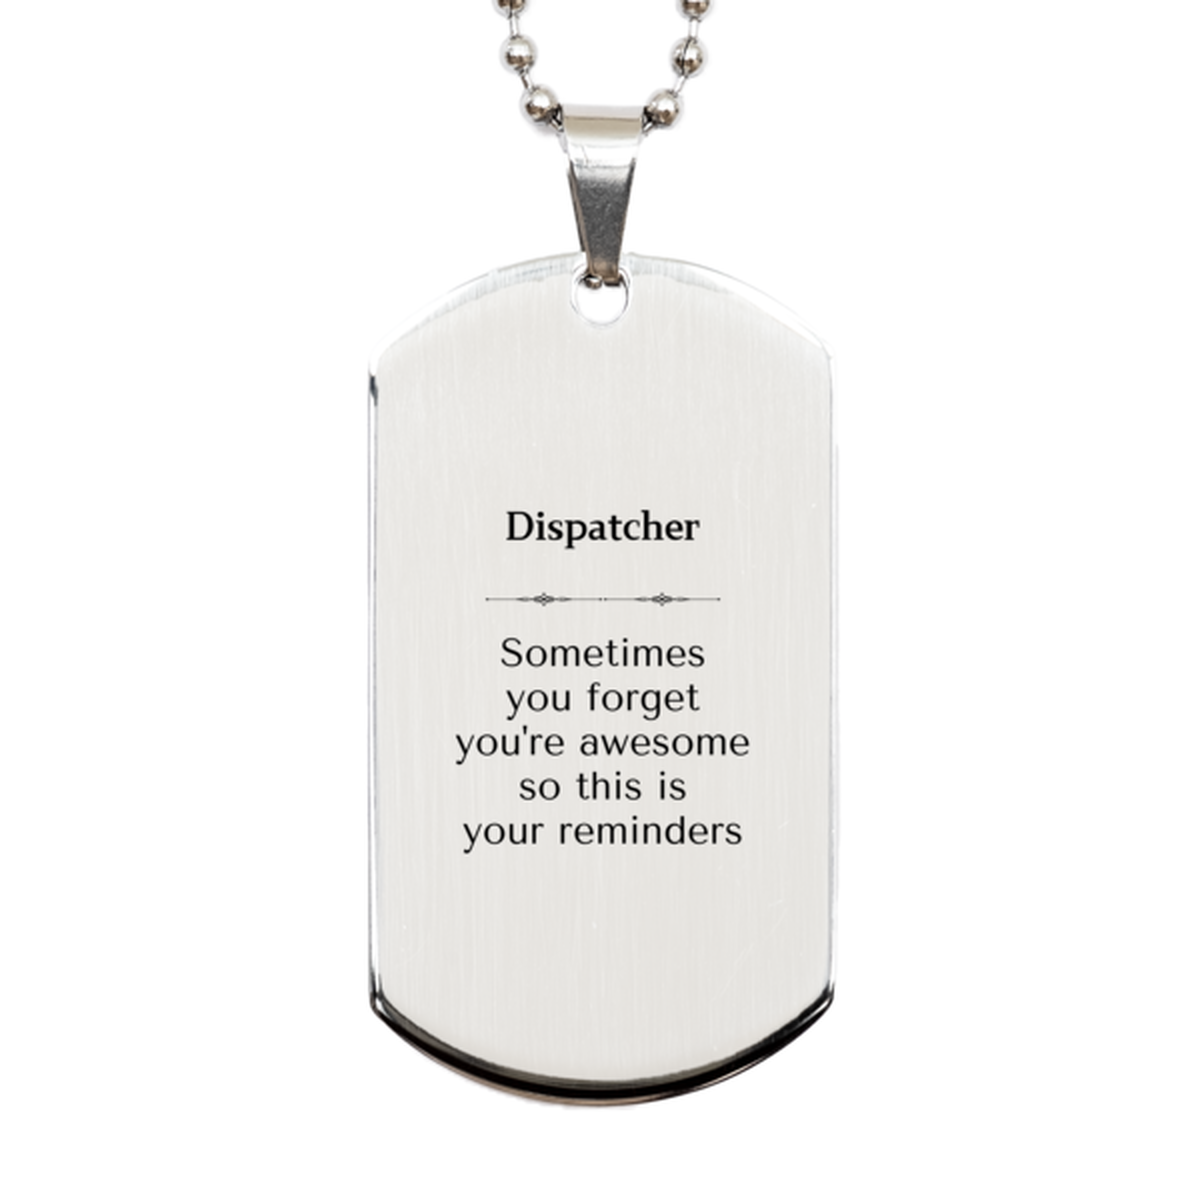 Sentimental Dispatcher Silver Dog Tag, Dispatcher Sometimes you forget you're awesome so this is your reminders, Graduation Christmas Birthday Gifts for Dispatcher, Men, Women, Coworkers